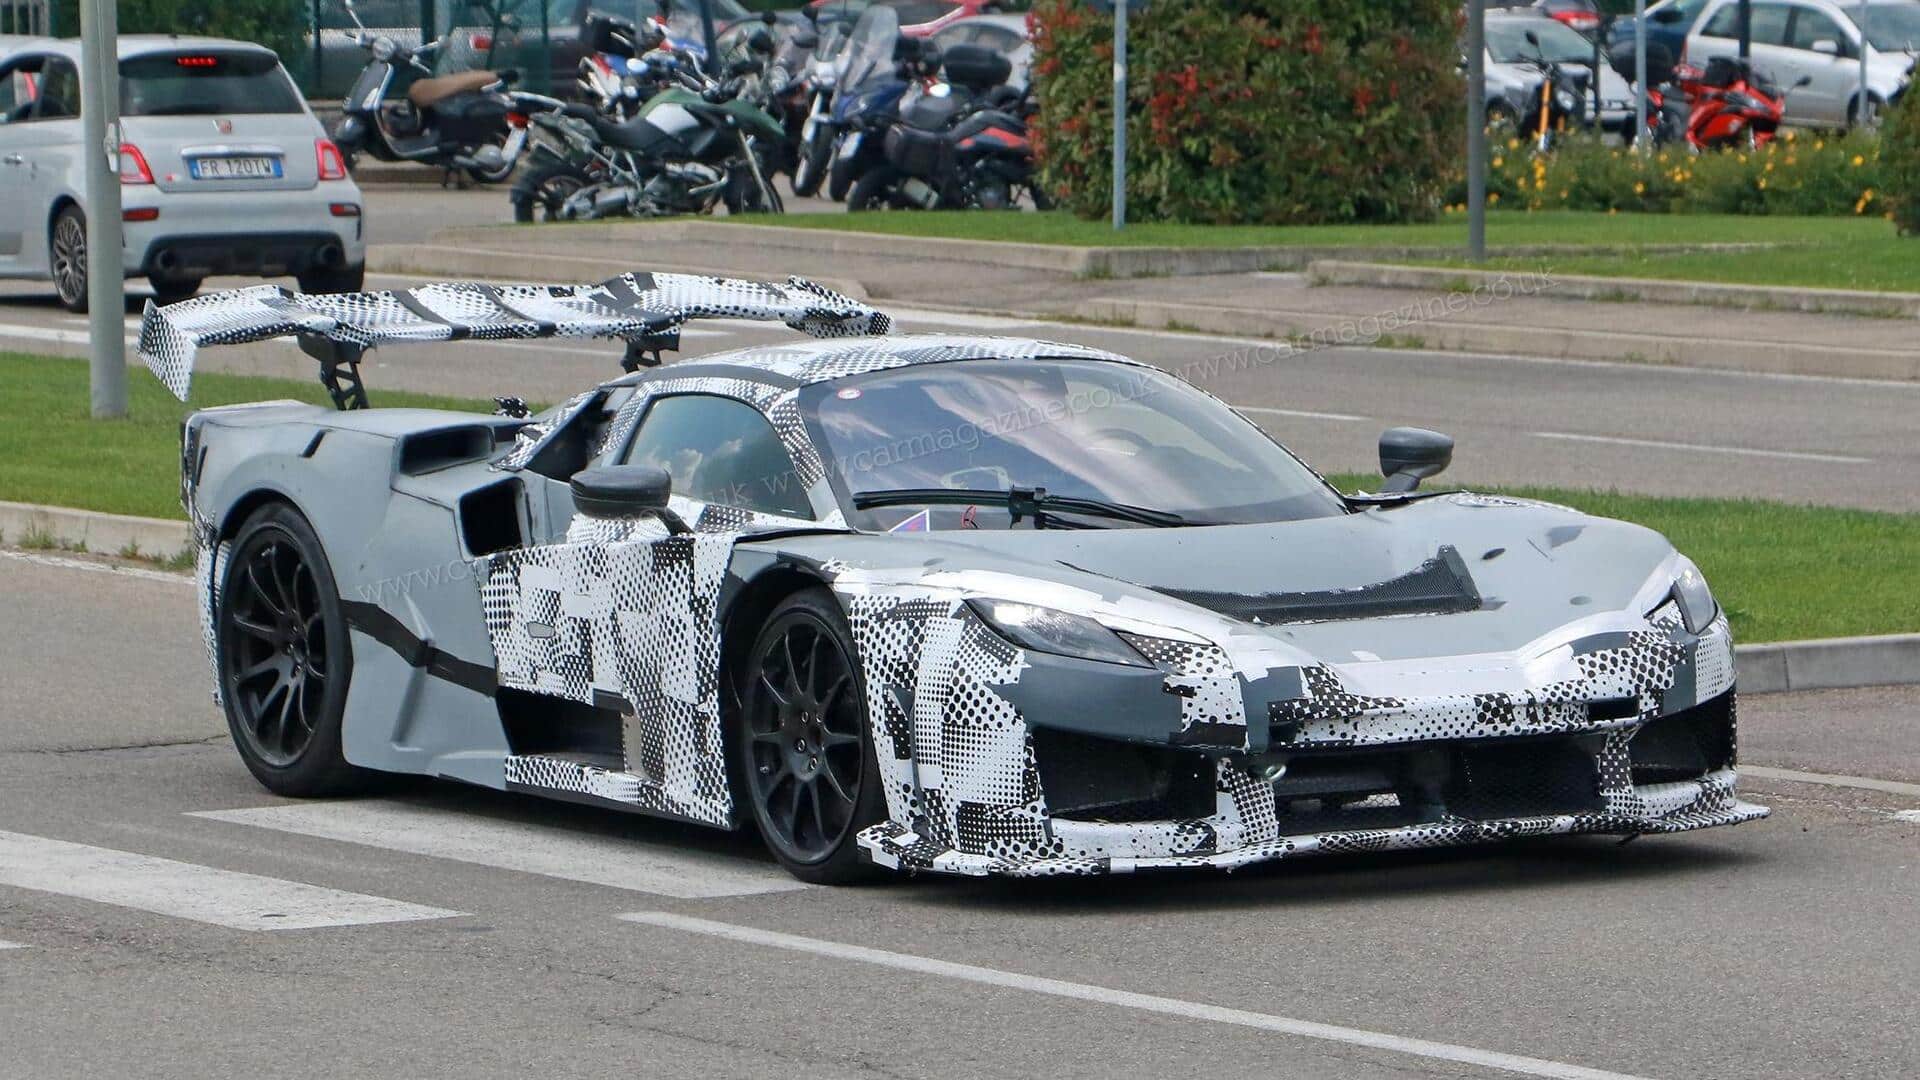 Ferrari hypercar's prototype spotted in Germany: What to expect